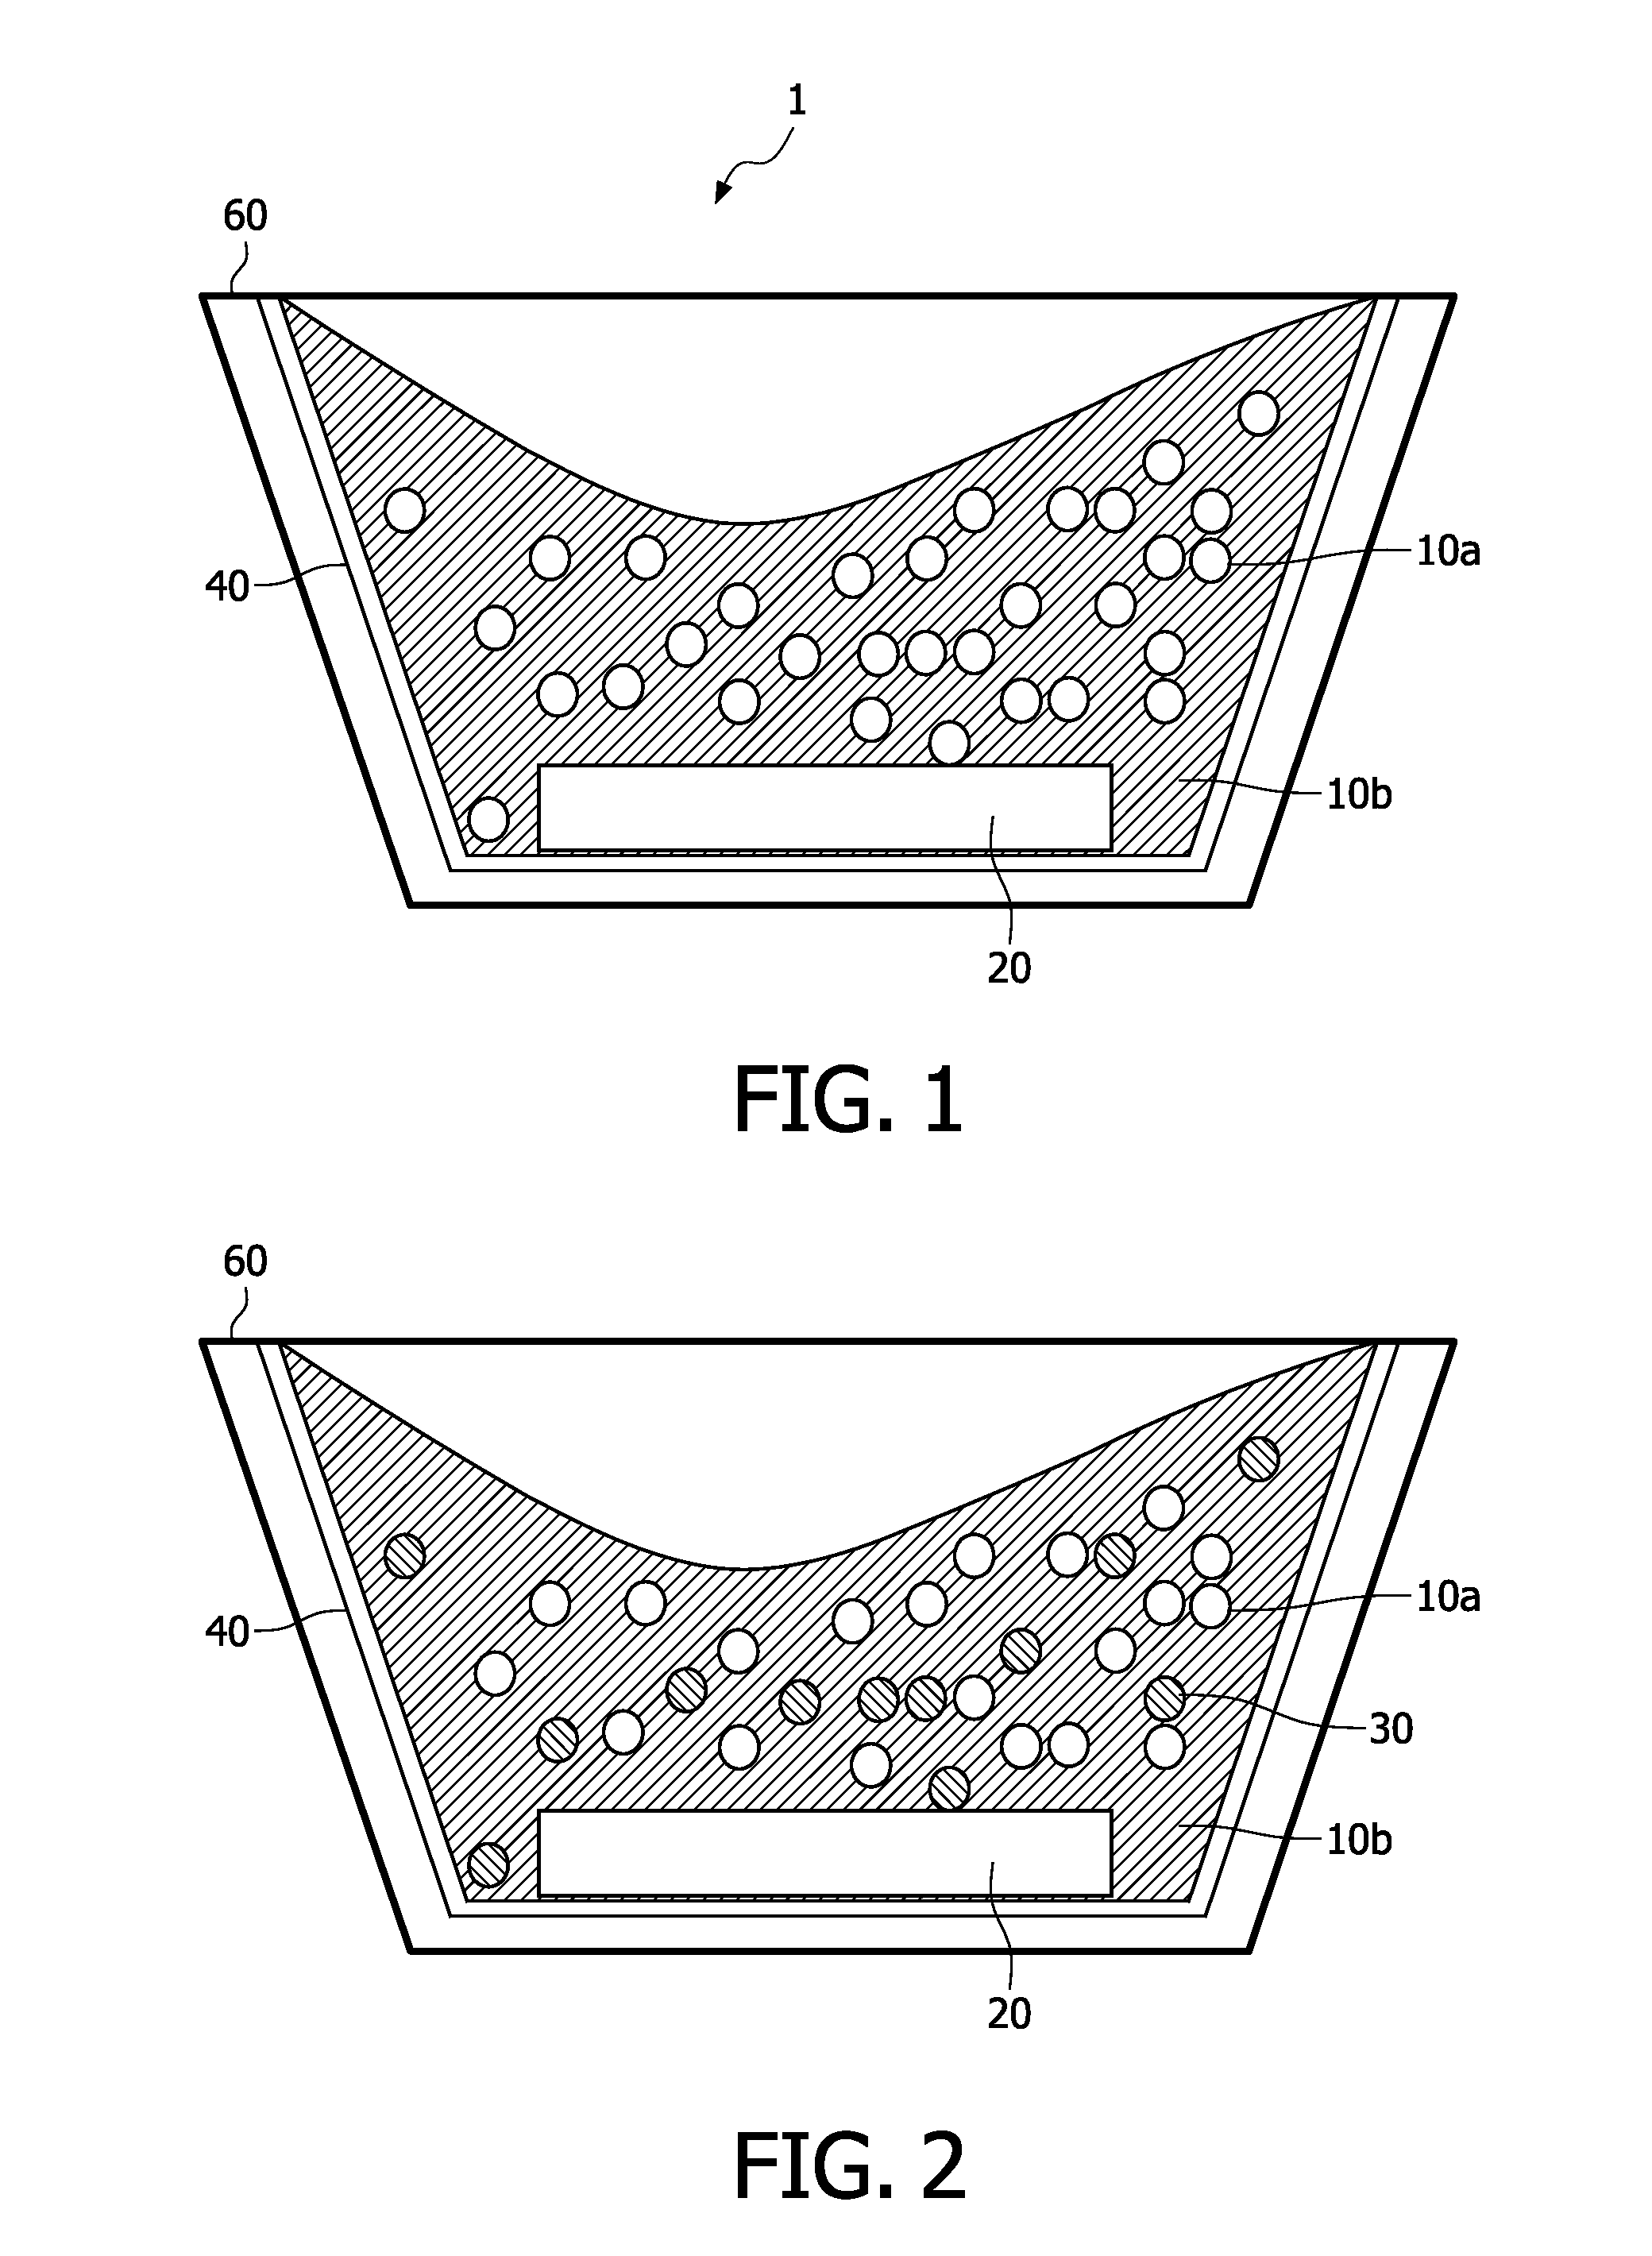 Illumination system comprising a compound with low thermal expansion coefficient